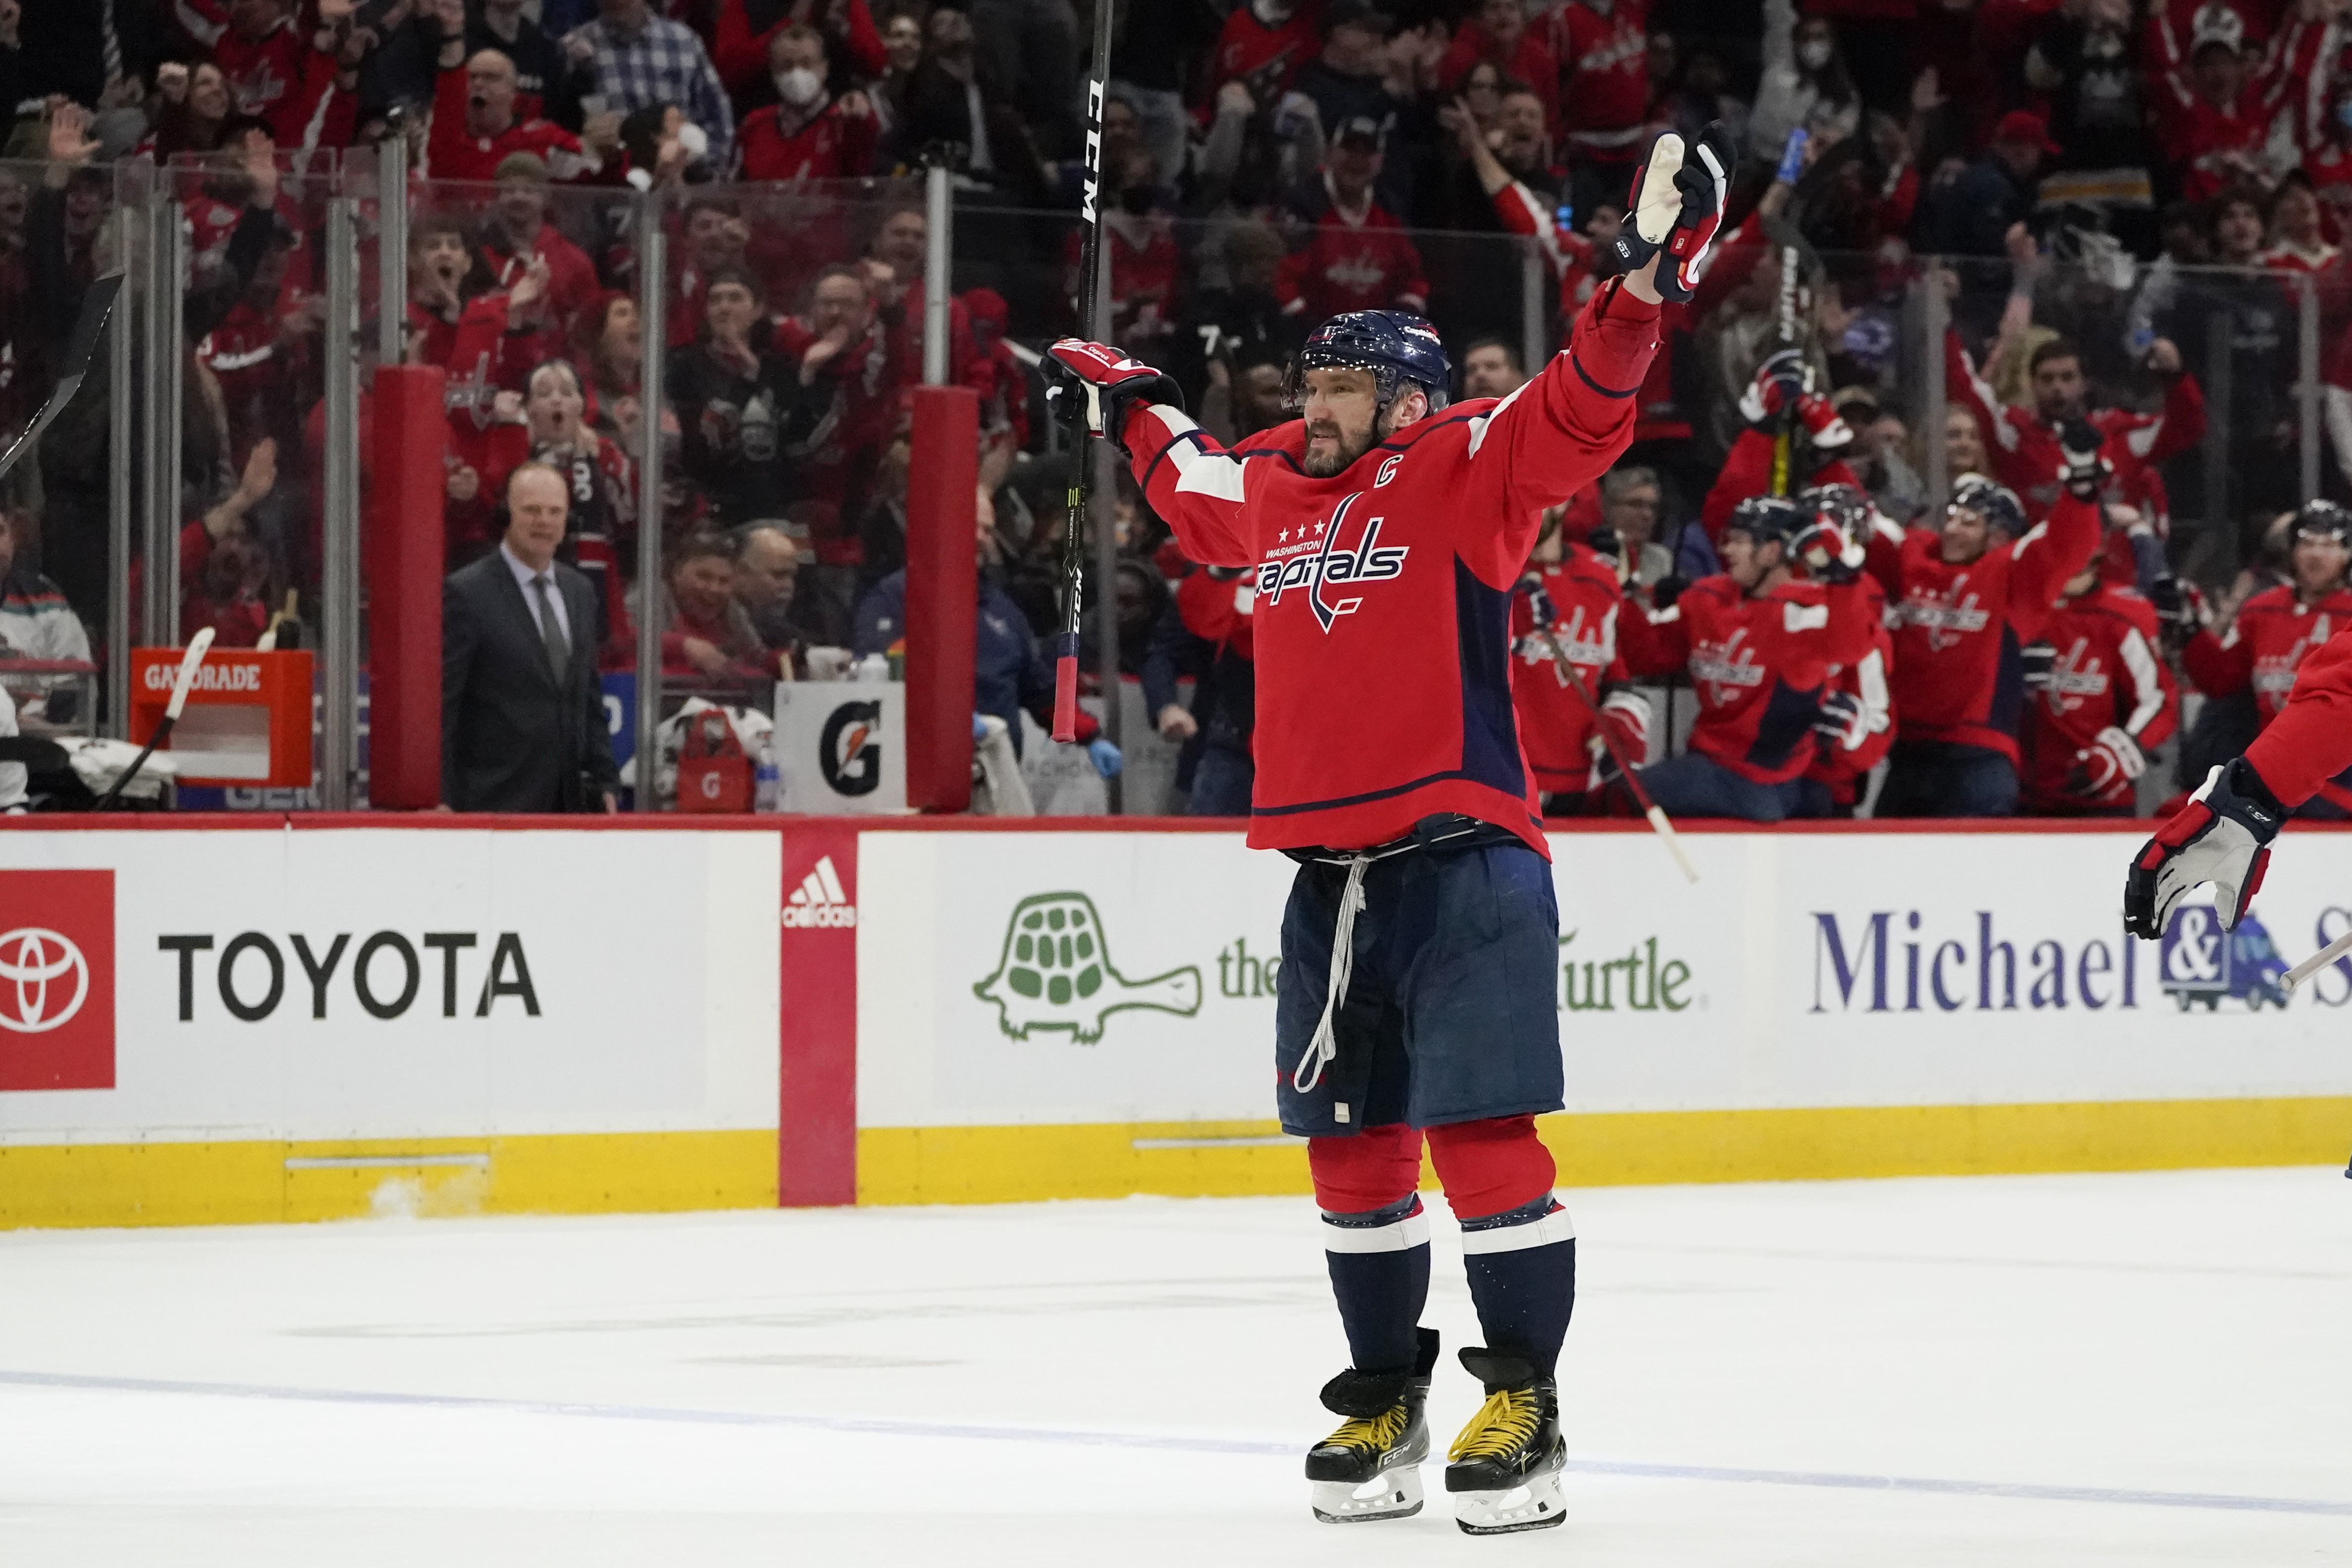 Alex Ovechkin Is Chasing Wayne Gretzky's Goals Record - The New